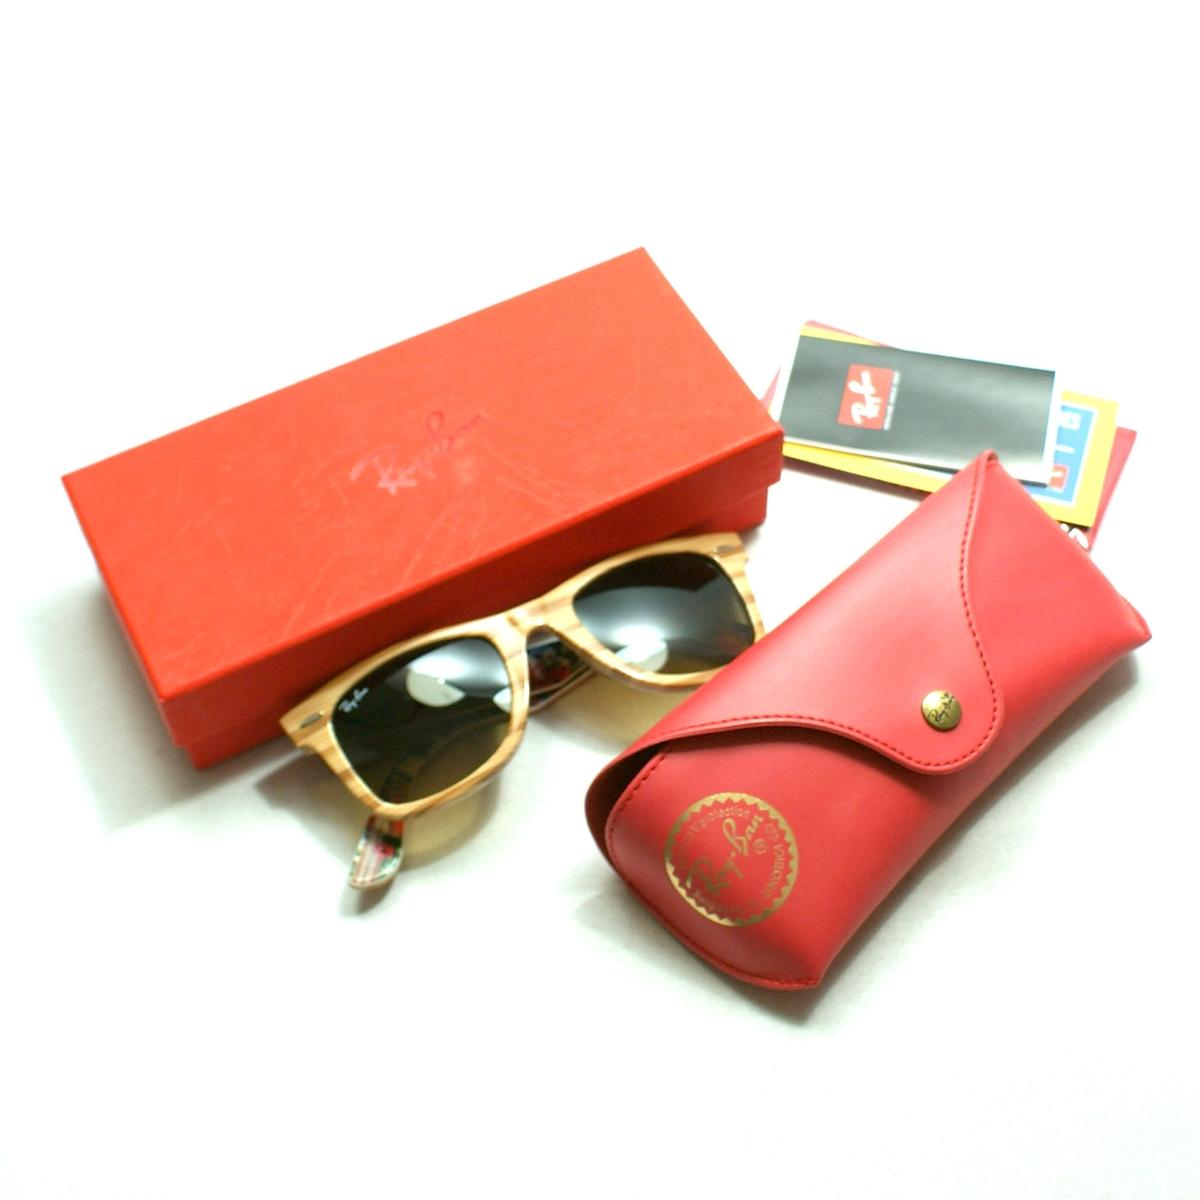 ray ban special series 3